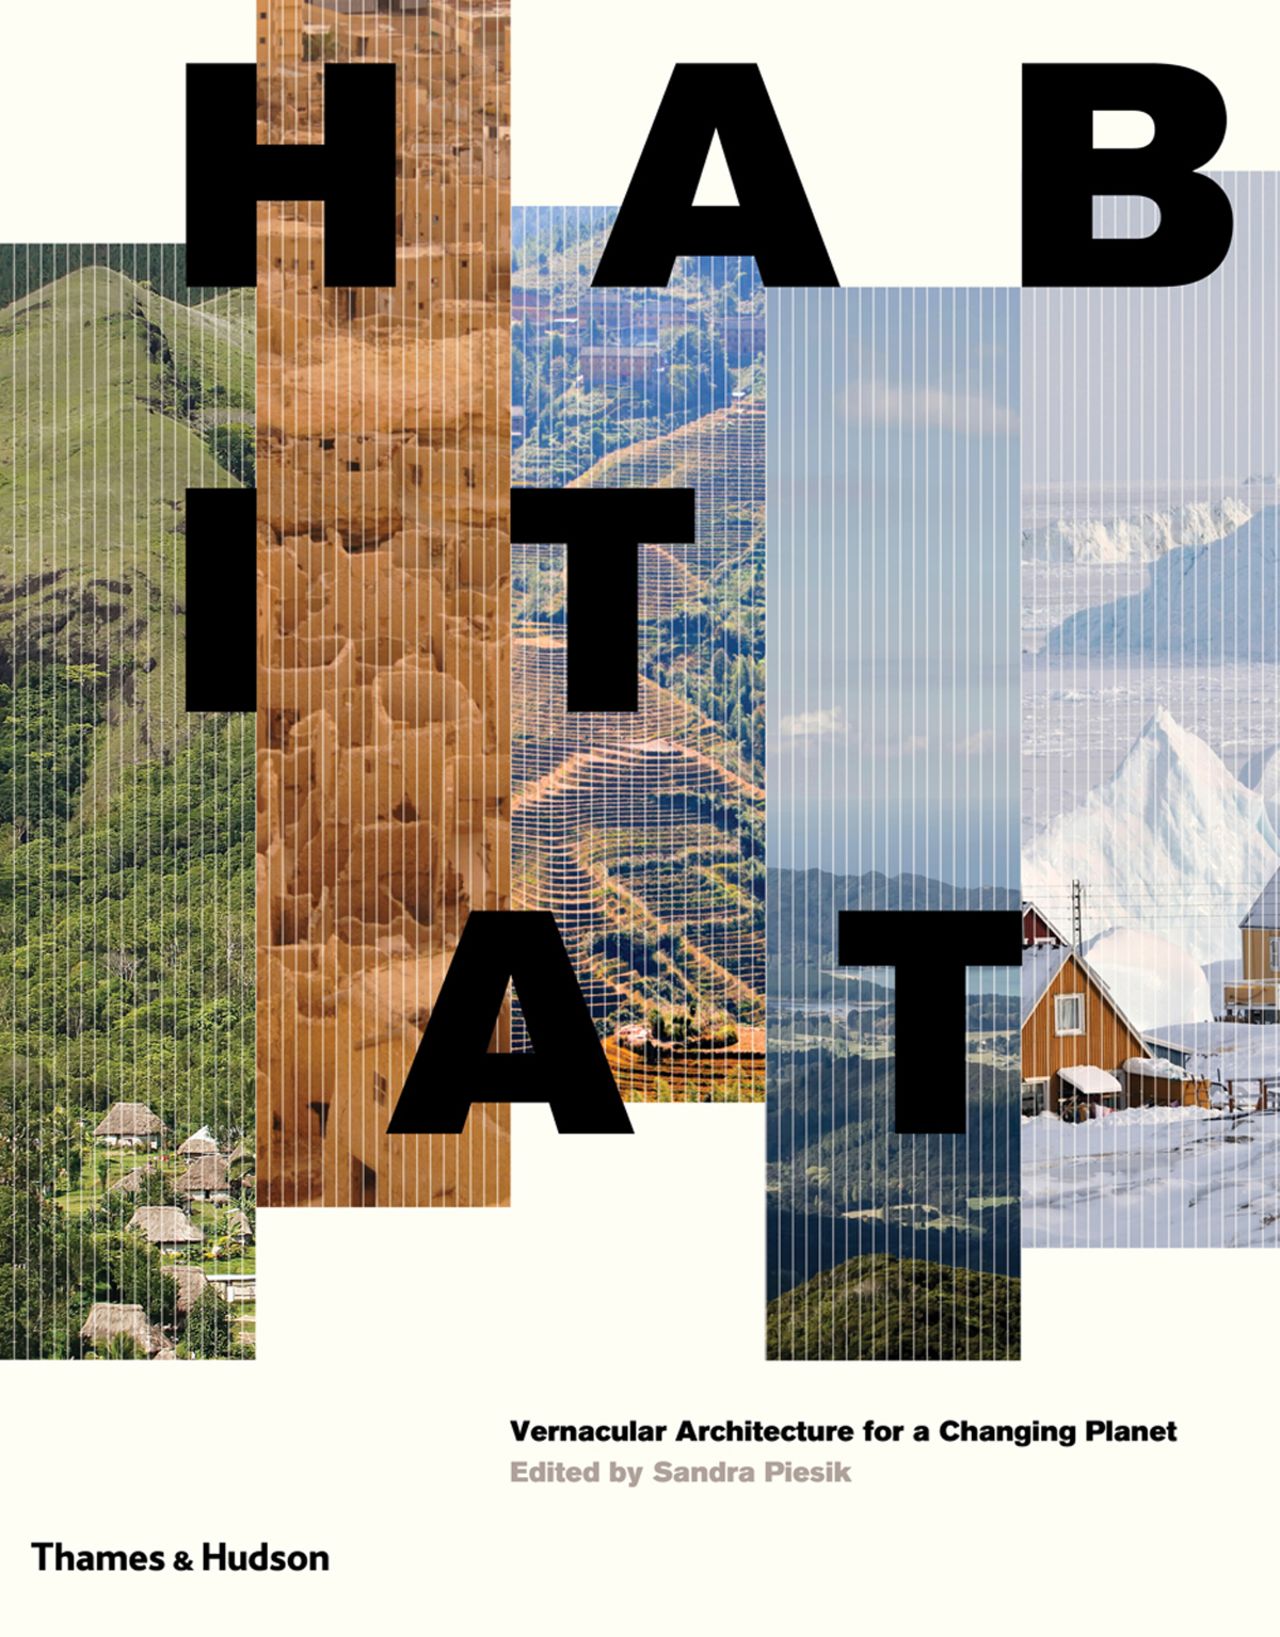 <a href="https://thamesandhudson.com/catalog/product/view/id/4513/s/habitat-9780500343241/category/2/" target="_blank" target="_blank">"Habitat: Vernacular Architecture for a Changing Planet"</a> by Sandra Piesik, published by Thames & Hudson, is out now. <br /><br /><br />Featuring dozens of case studies from five climate zones, "Habitat: Vernacular Architecture for a Changing Planet" aims to highlight lessons that can be learned from traditional forms of architecture.